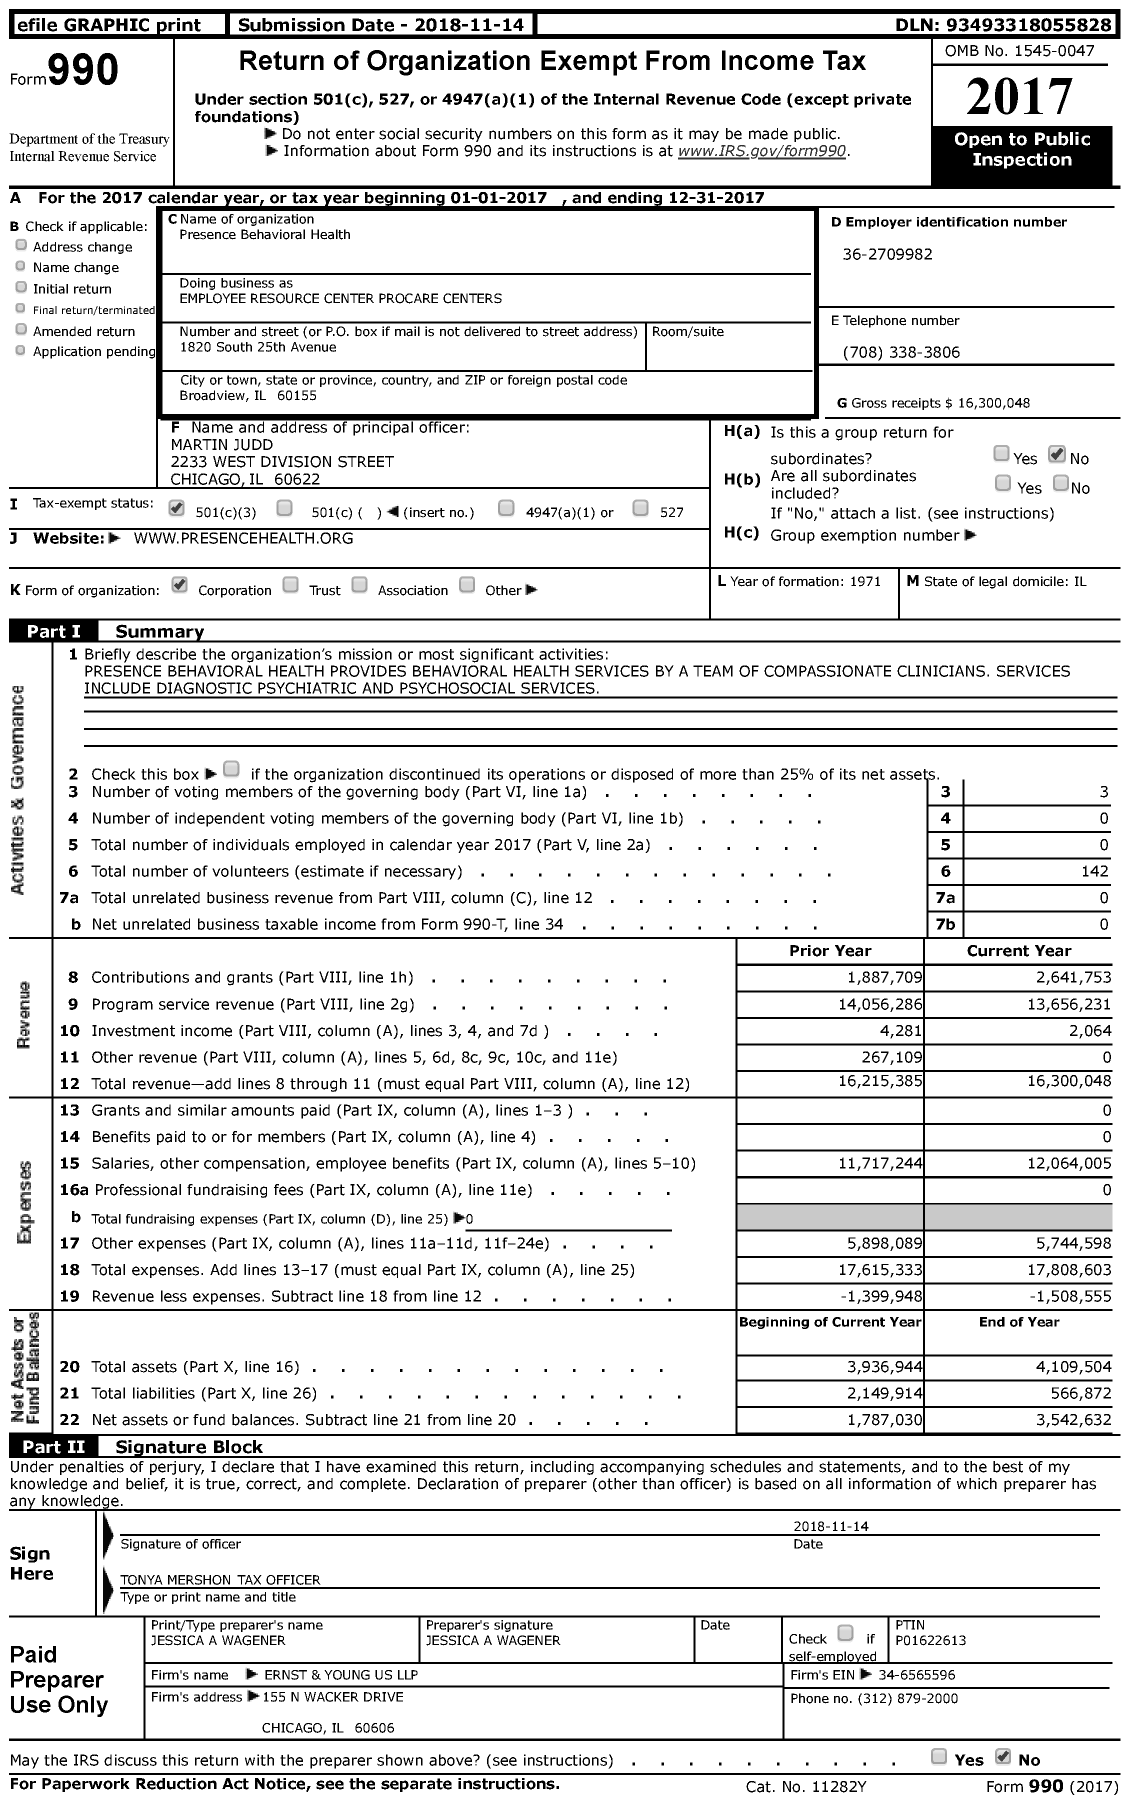 Image of first page of 2017 Form 990 for Employee Resource Centers Procare Centers